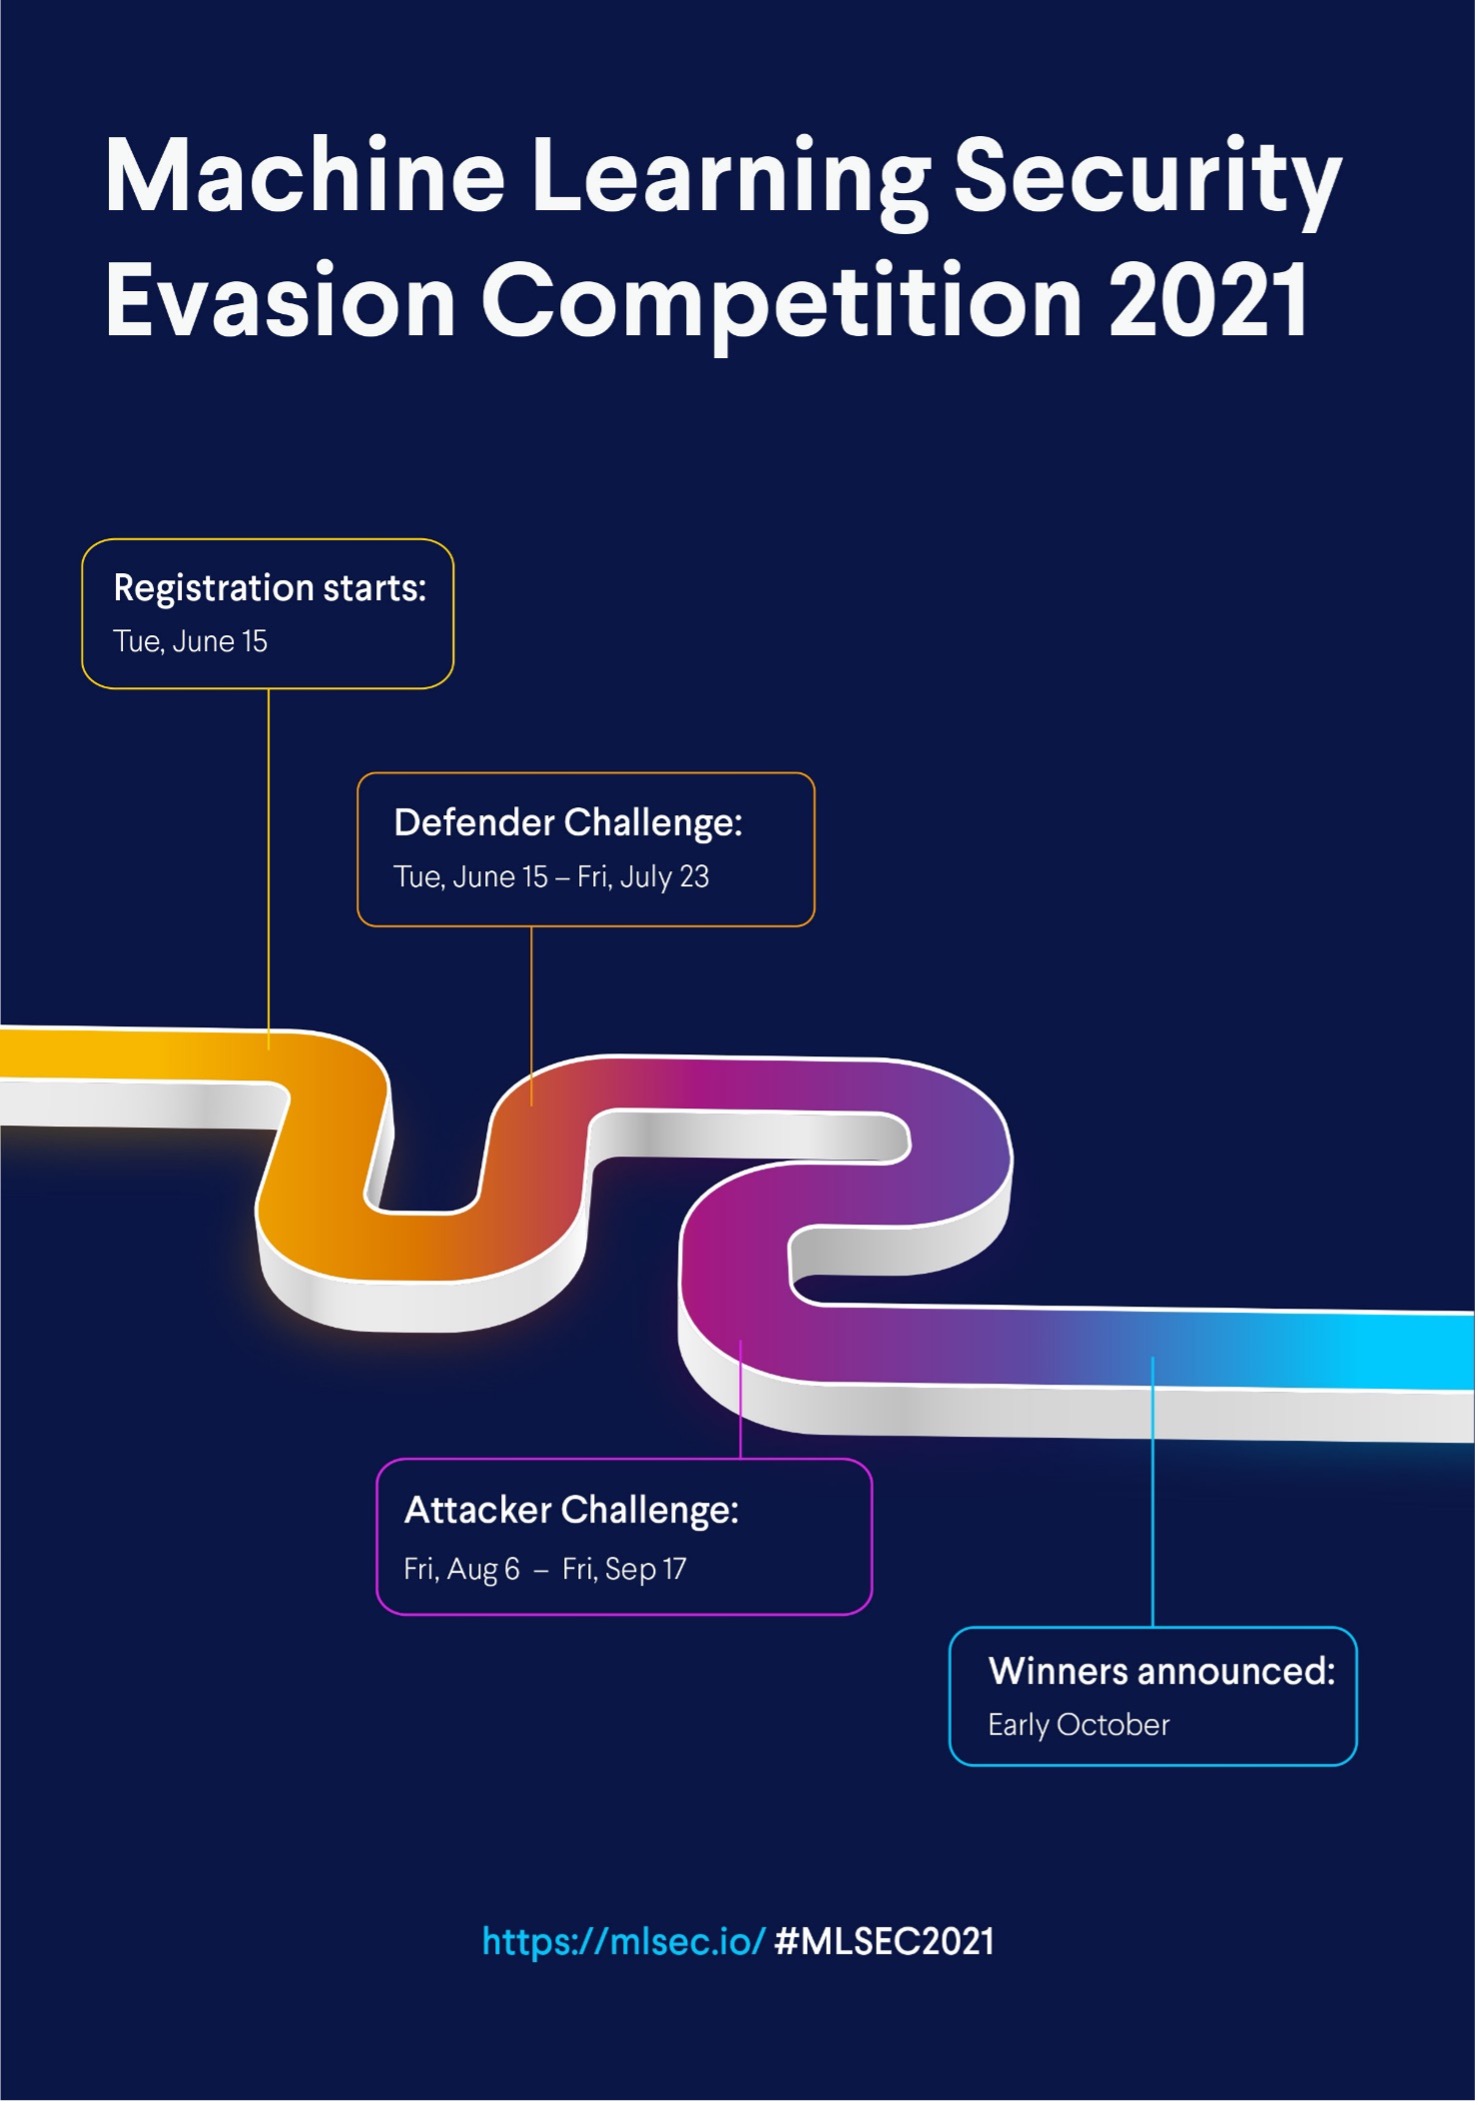 Timeline of the Machine Learning Security Evasion Competition 2021